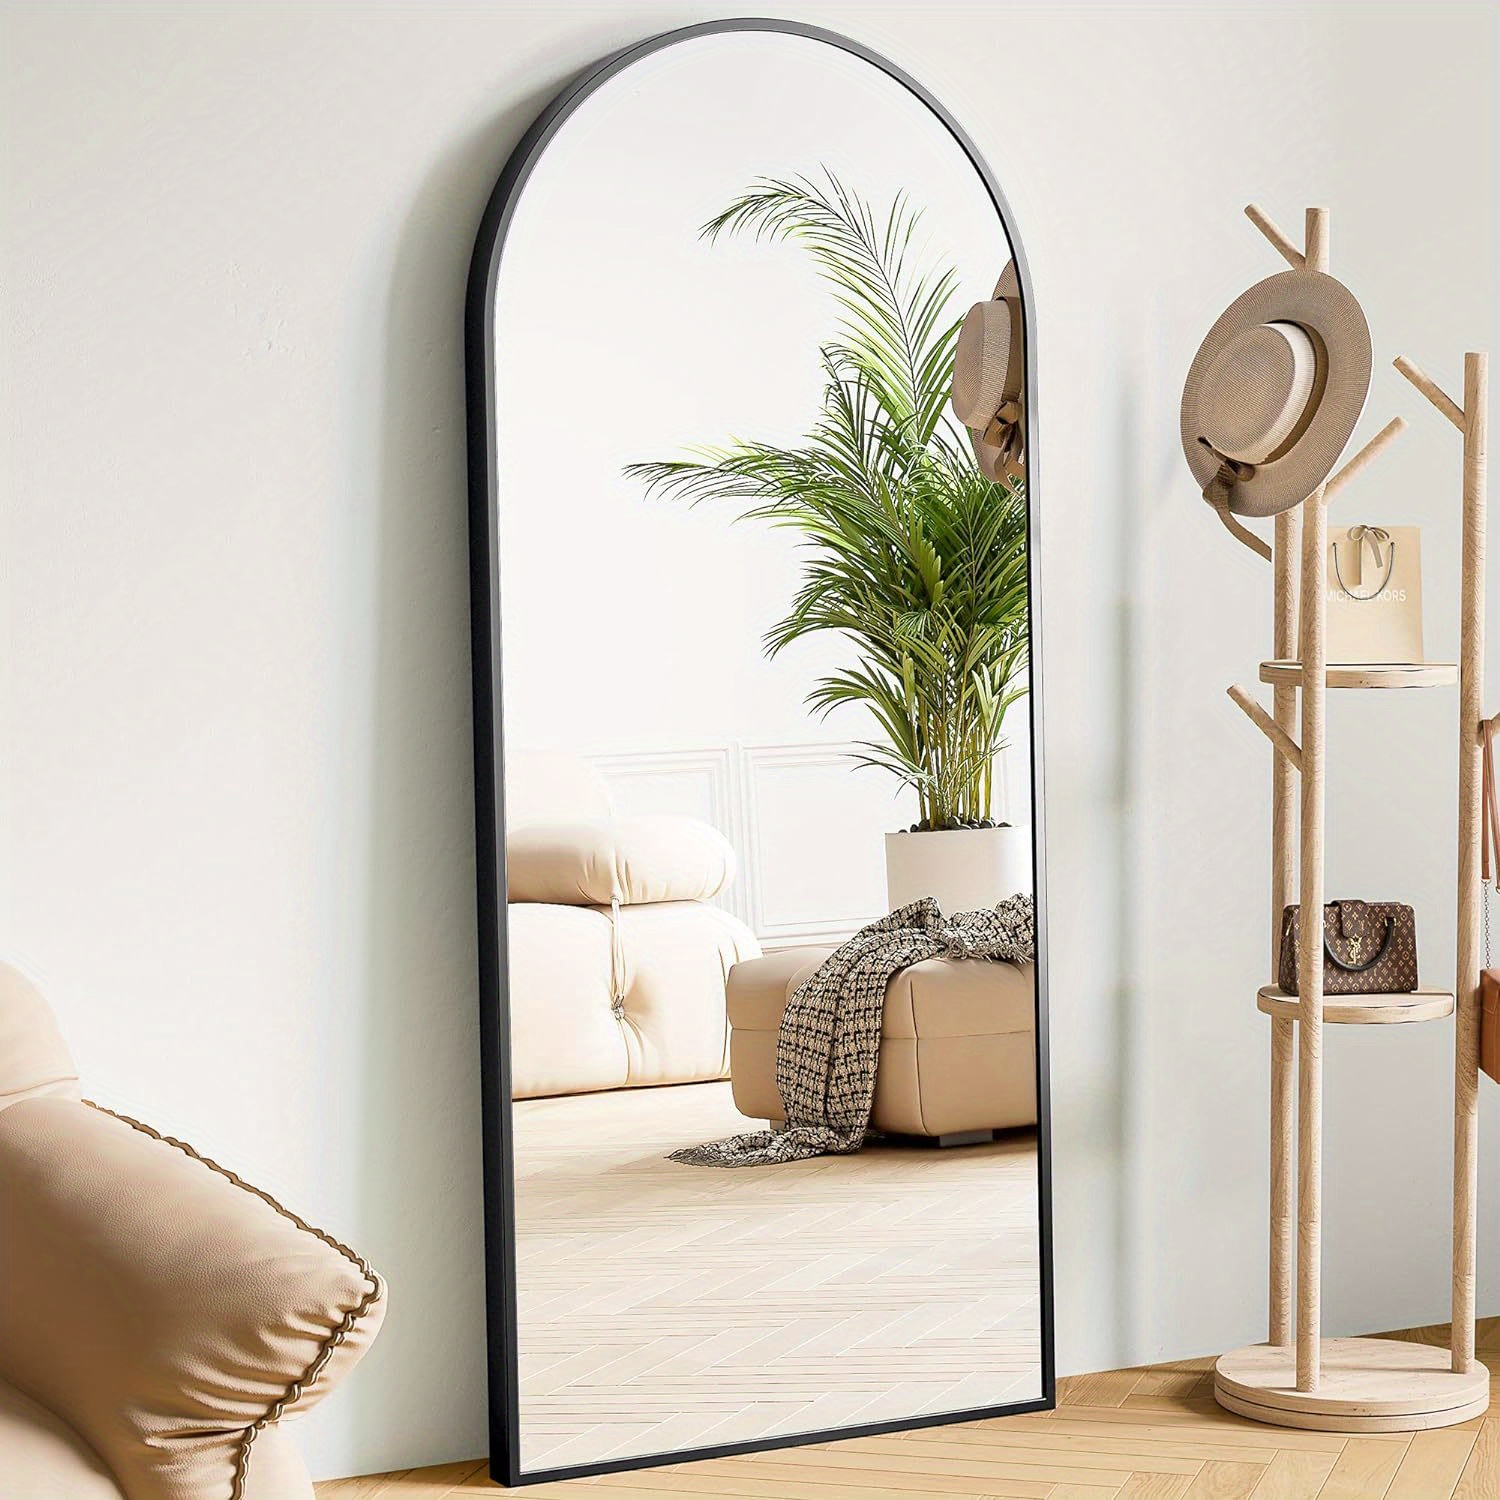 

Arched Full Length Mirror 64" X 21" Full Body Standing Hanging Leaning Large Long Tall With Stand Sturdy Aluminum Alloy Thin Frame For Bedroom, Cloakroom, Living Room, Home, Black, Gold